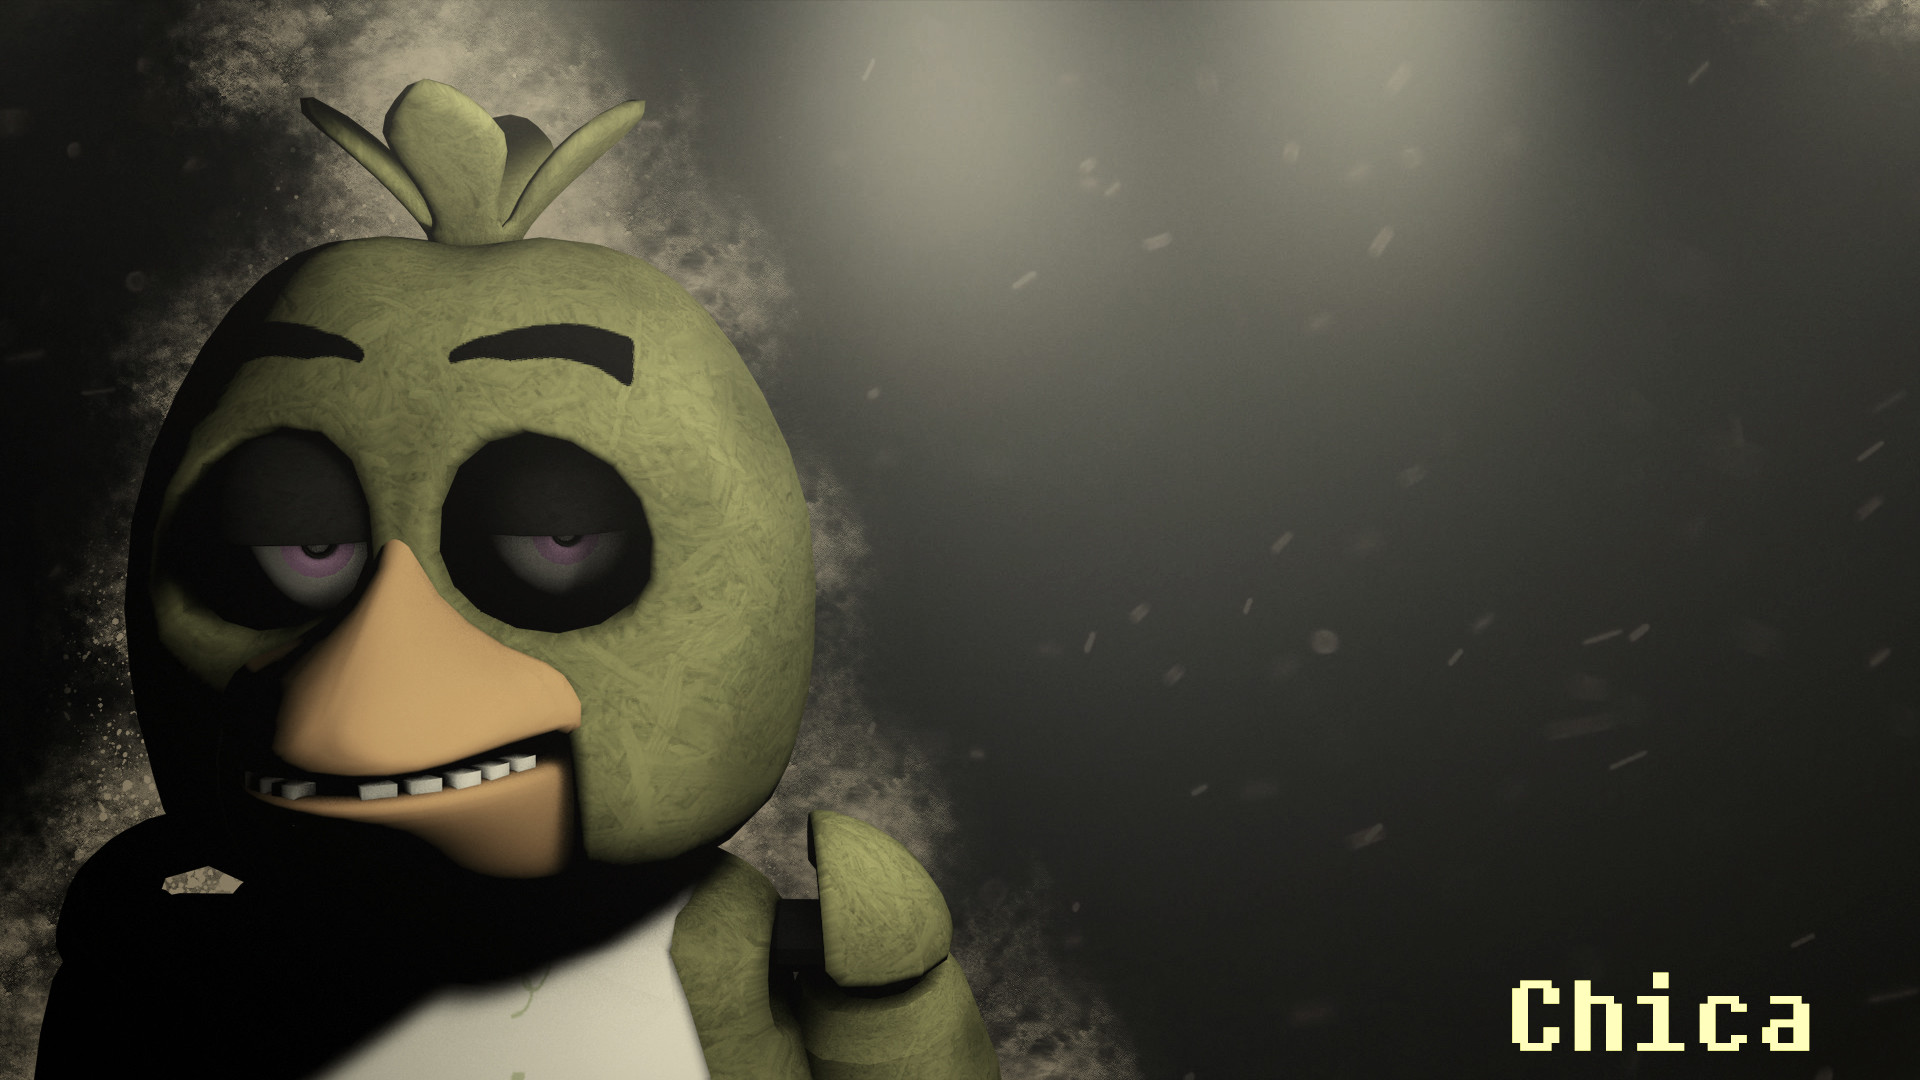 1920x1080 Search Results for “fnaf wallpaper chica” – Adorable Wallpapers